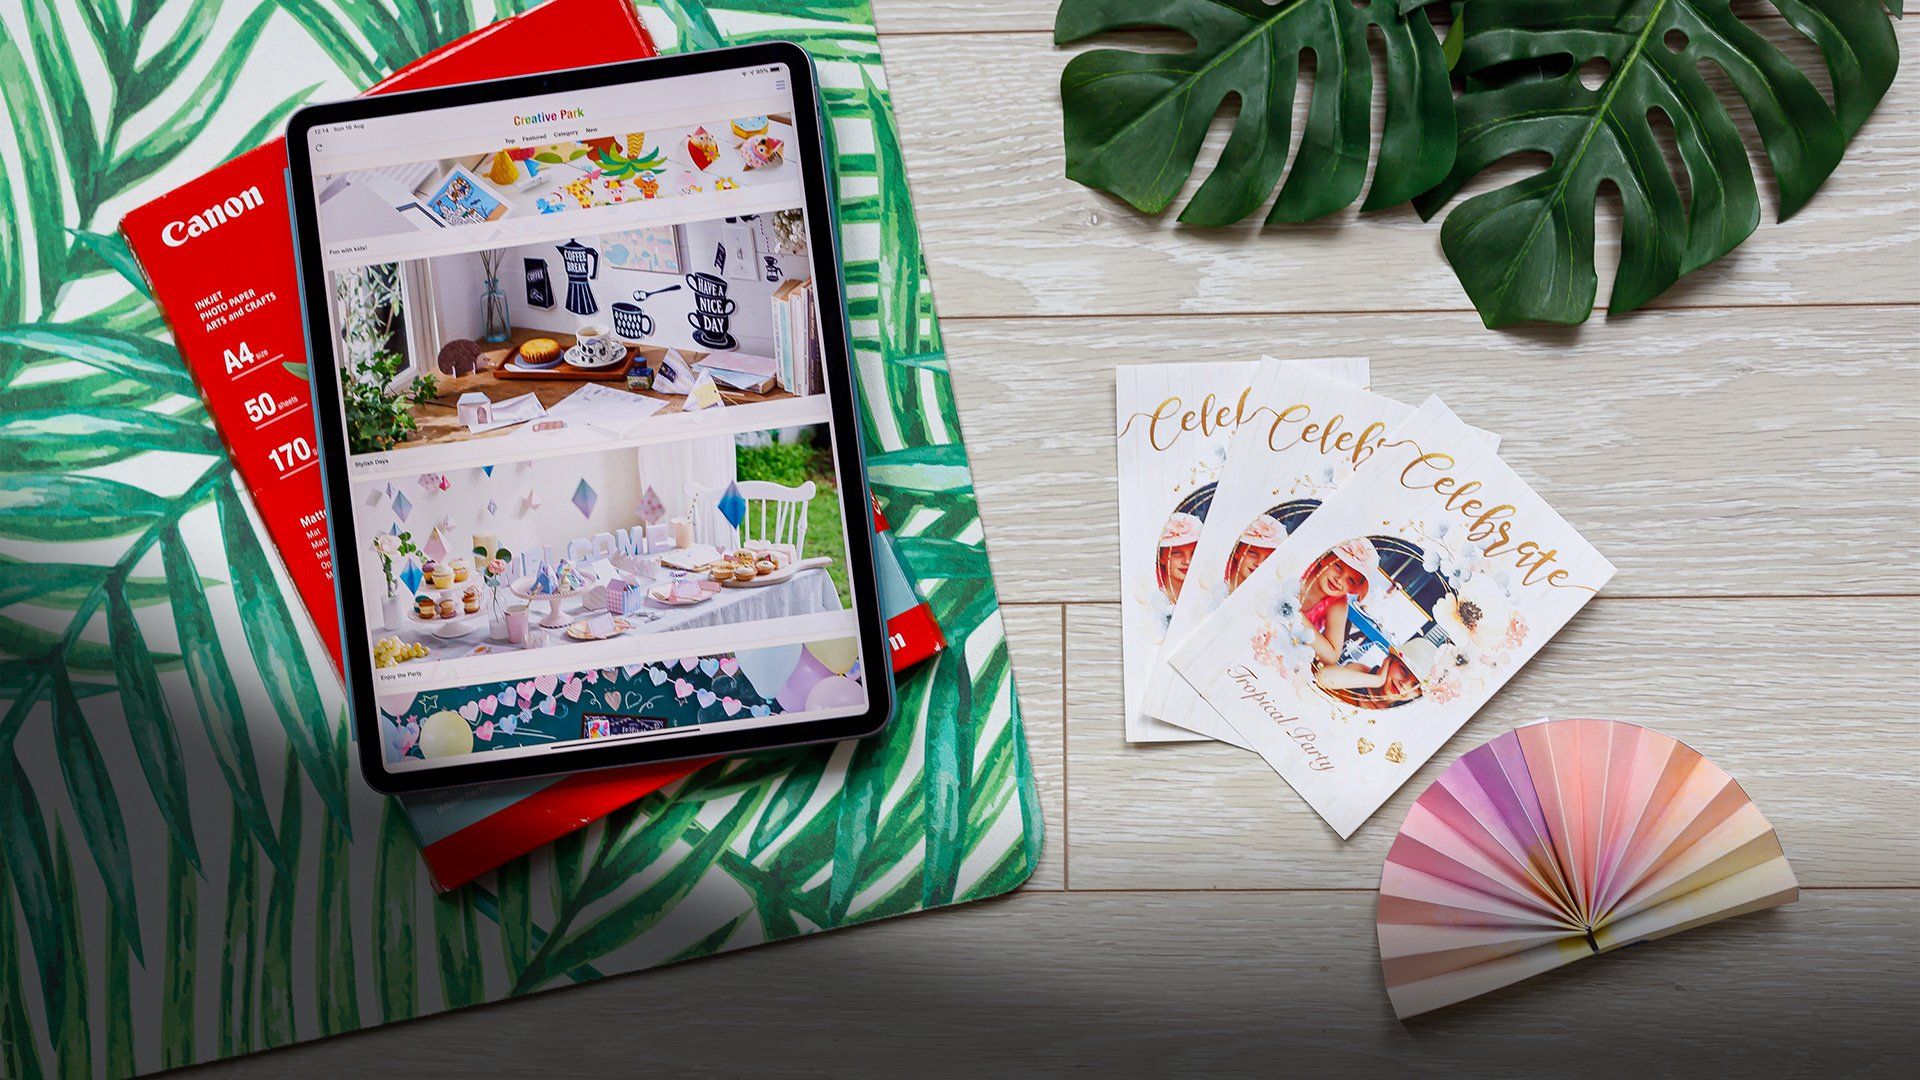 A tablet showing the Creative Park app next to personalised cards and a party garland.